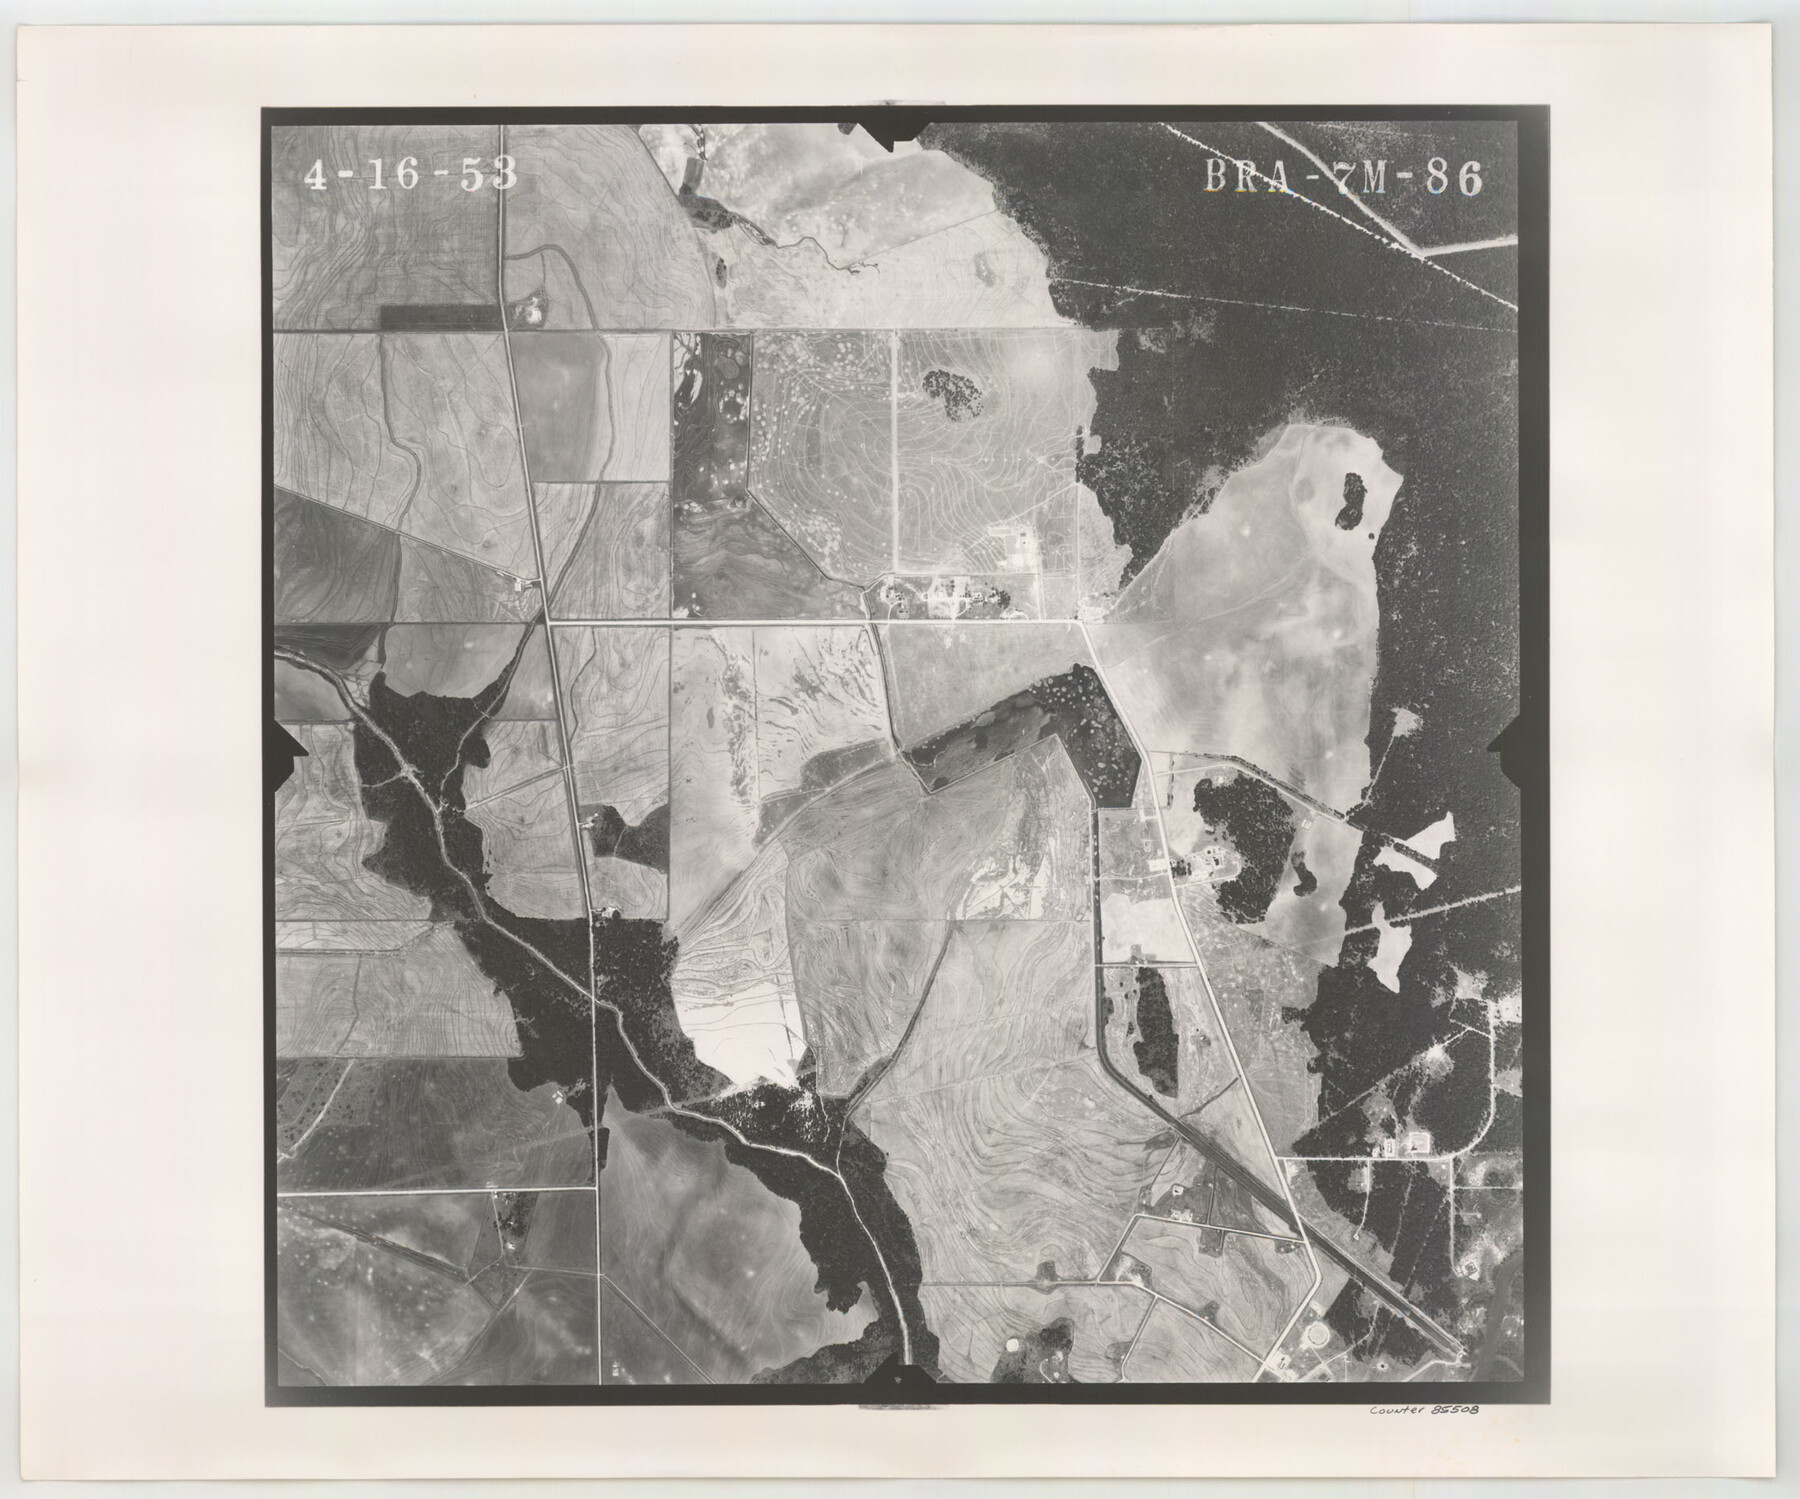 85508, Flight Mission No. BRA-7M, Frame 86, Jefferson County, General Map Collection